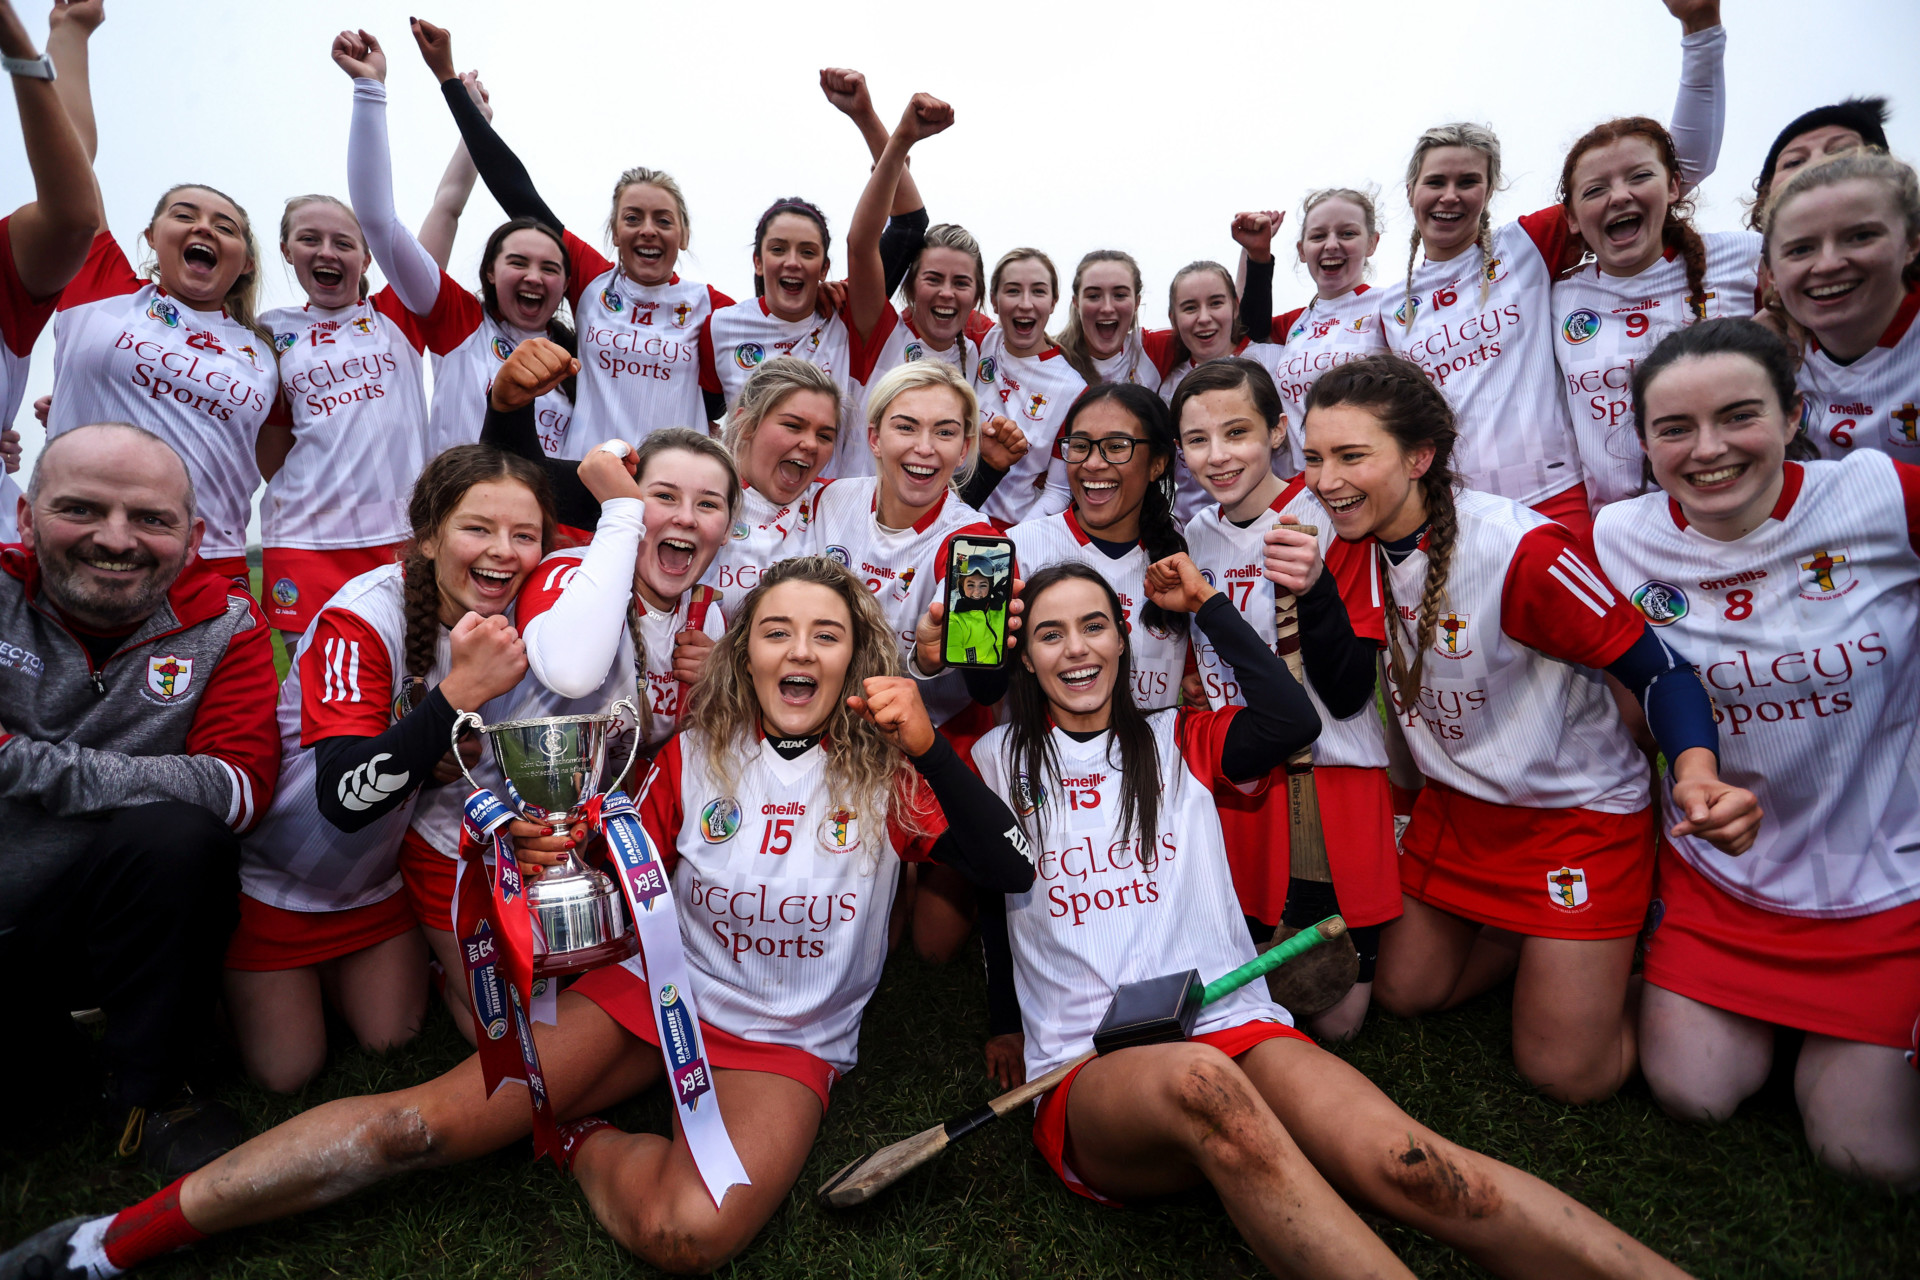 Glorys days for underage camogie and Ladies football teams